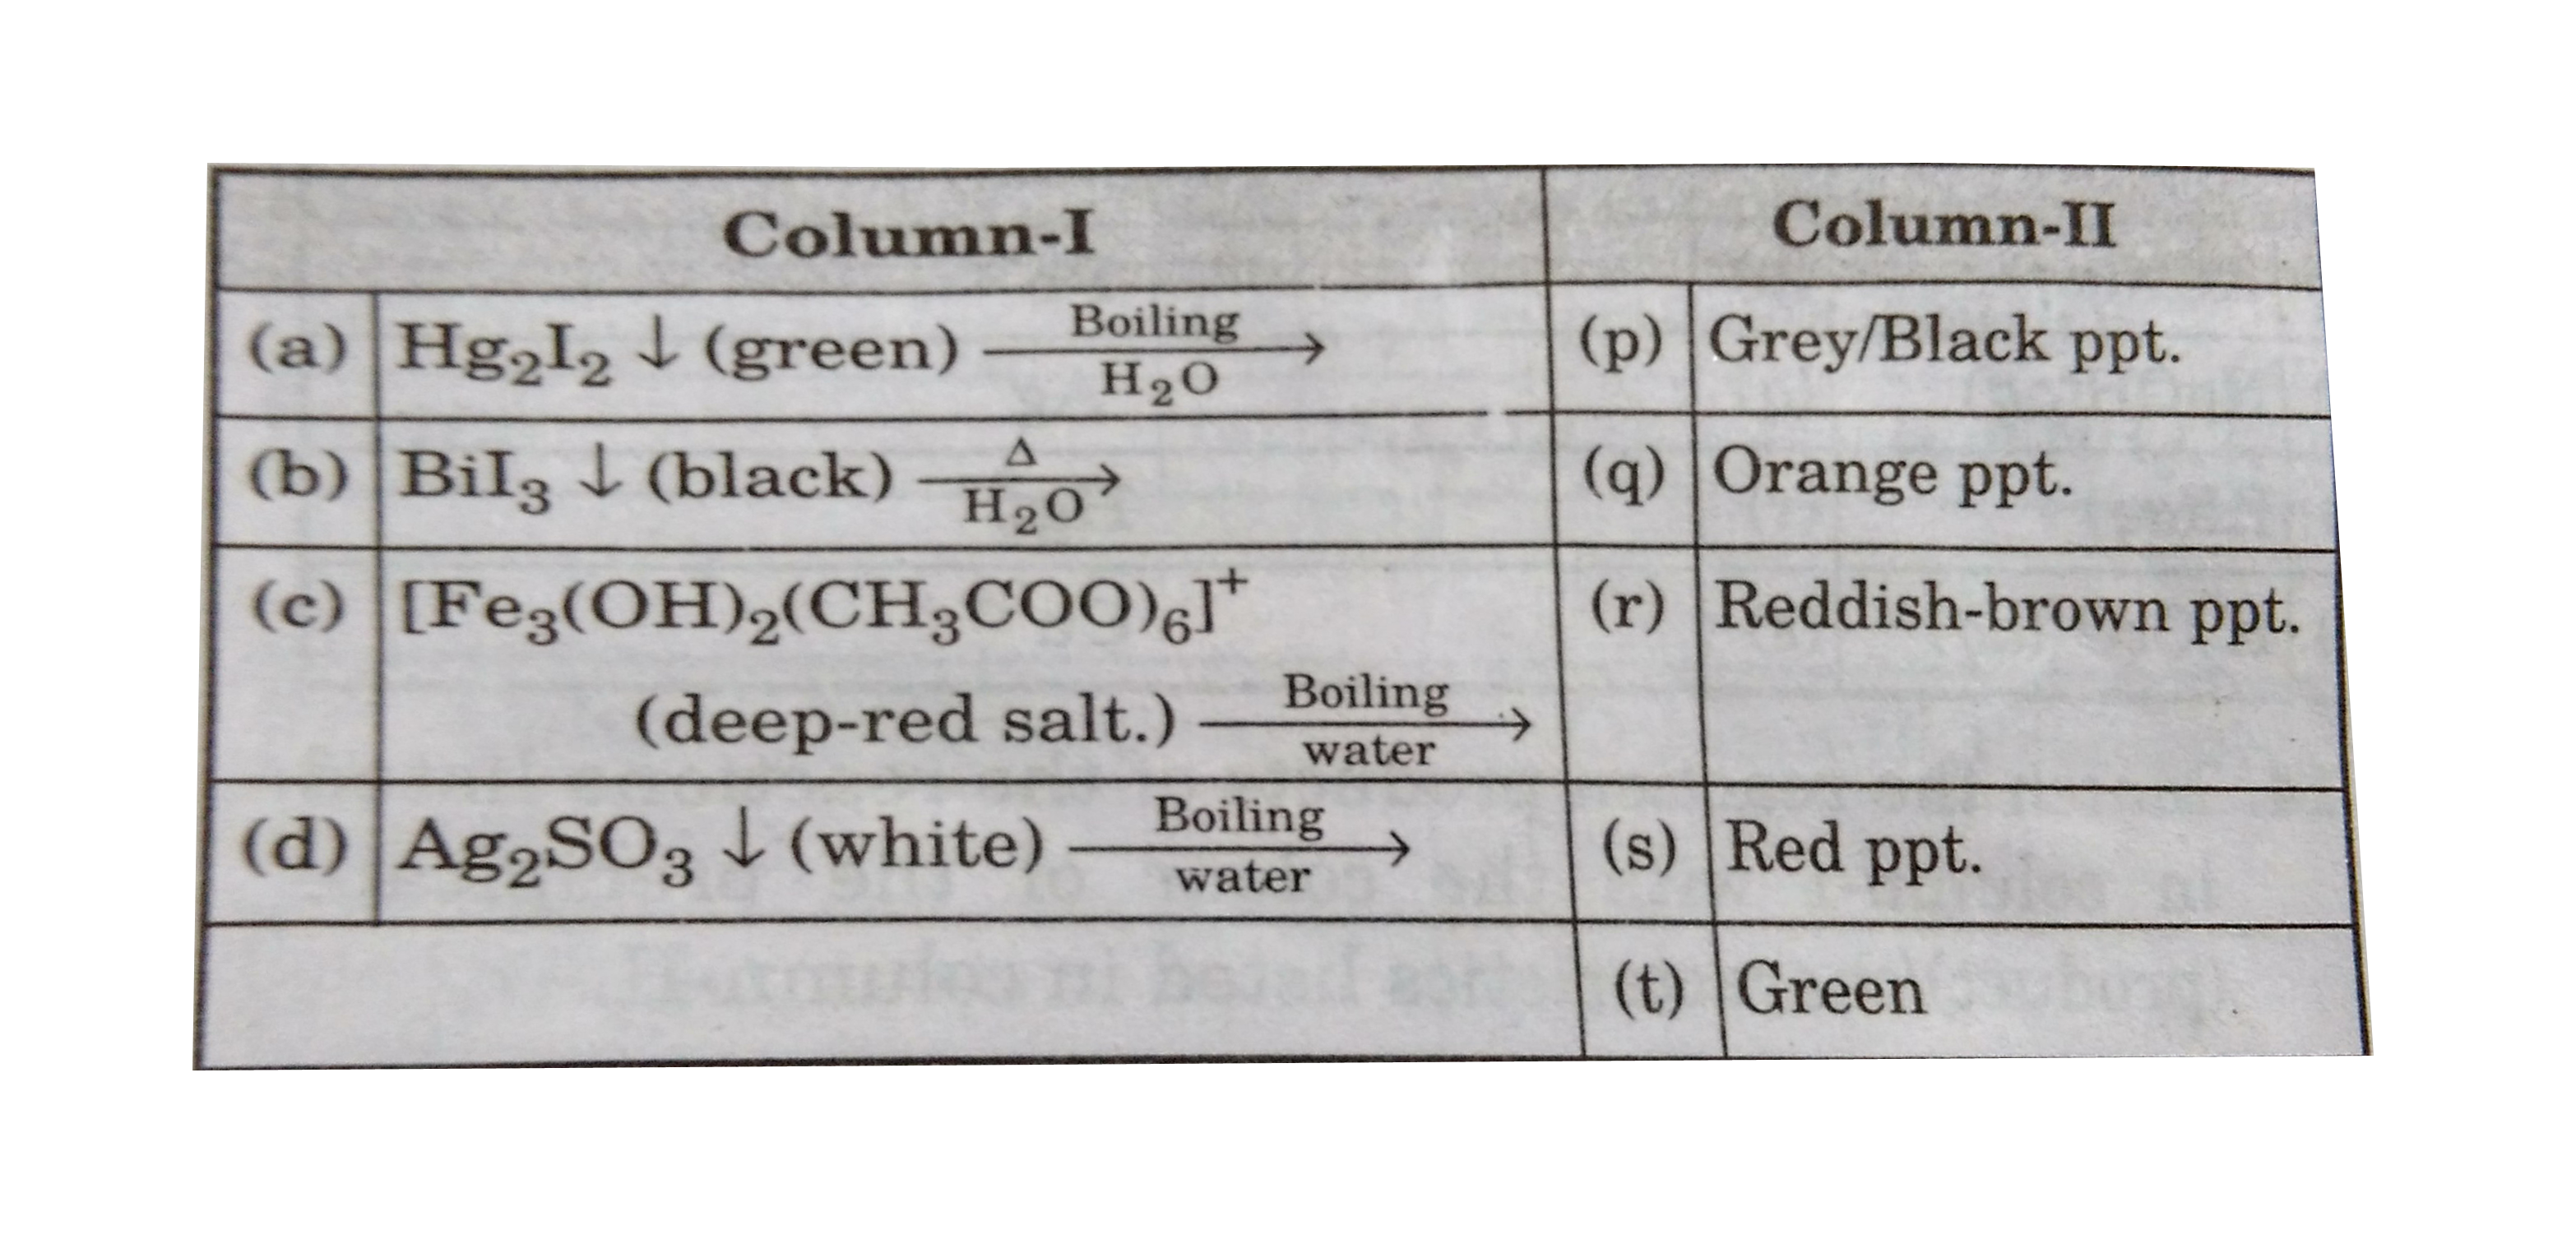 Match the products of the reactions listed in column-I with the colour of the precipitate(s) listed in column-II